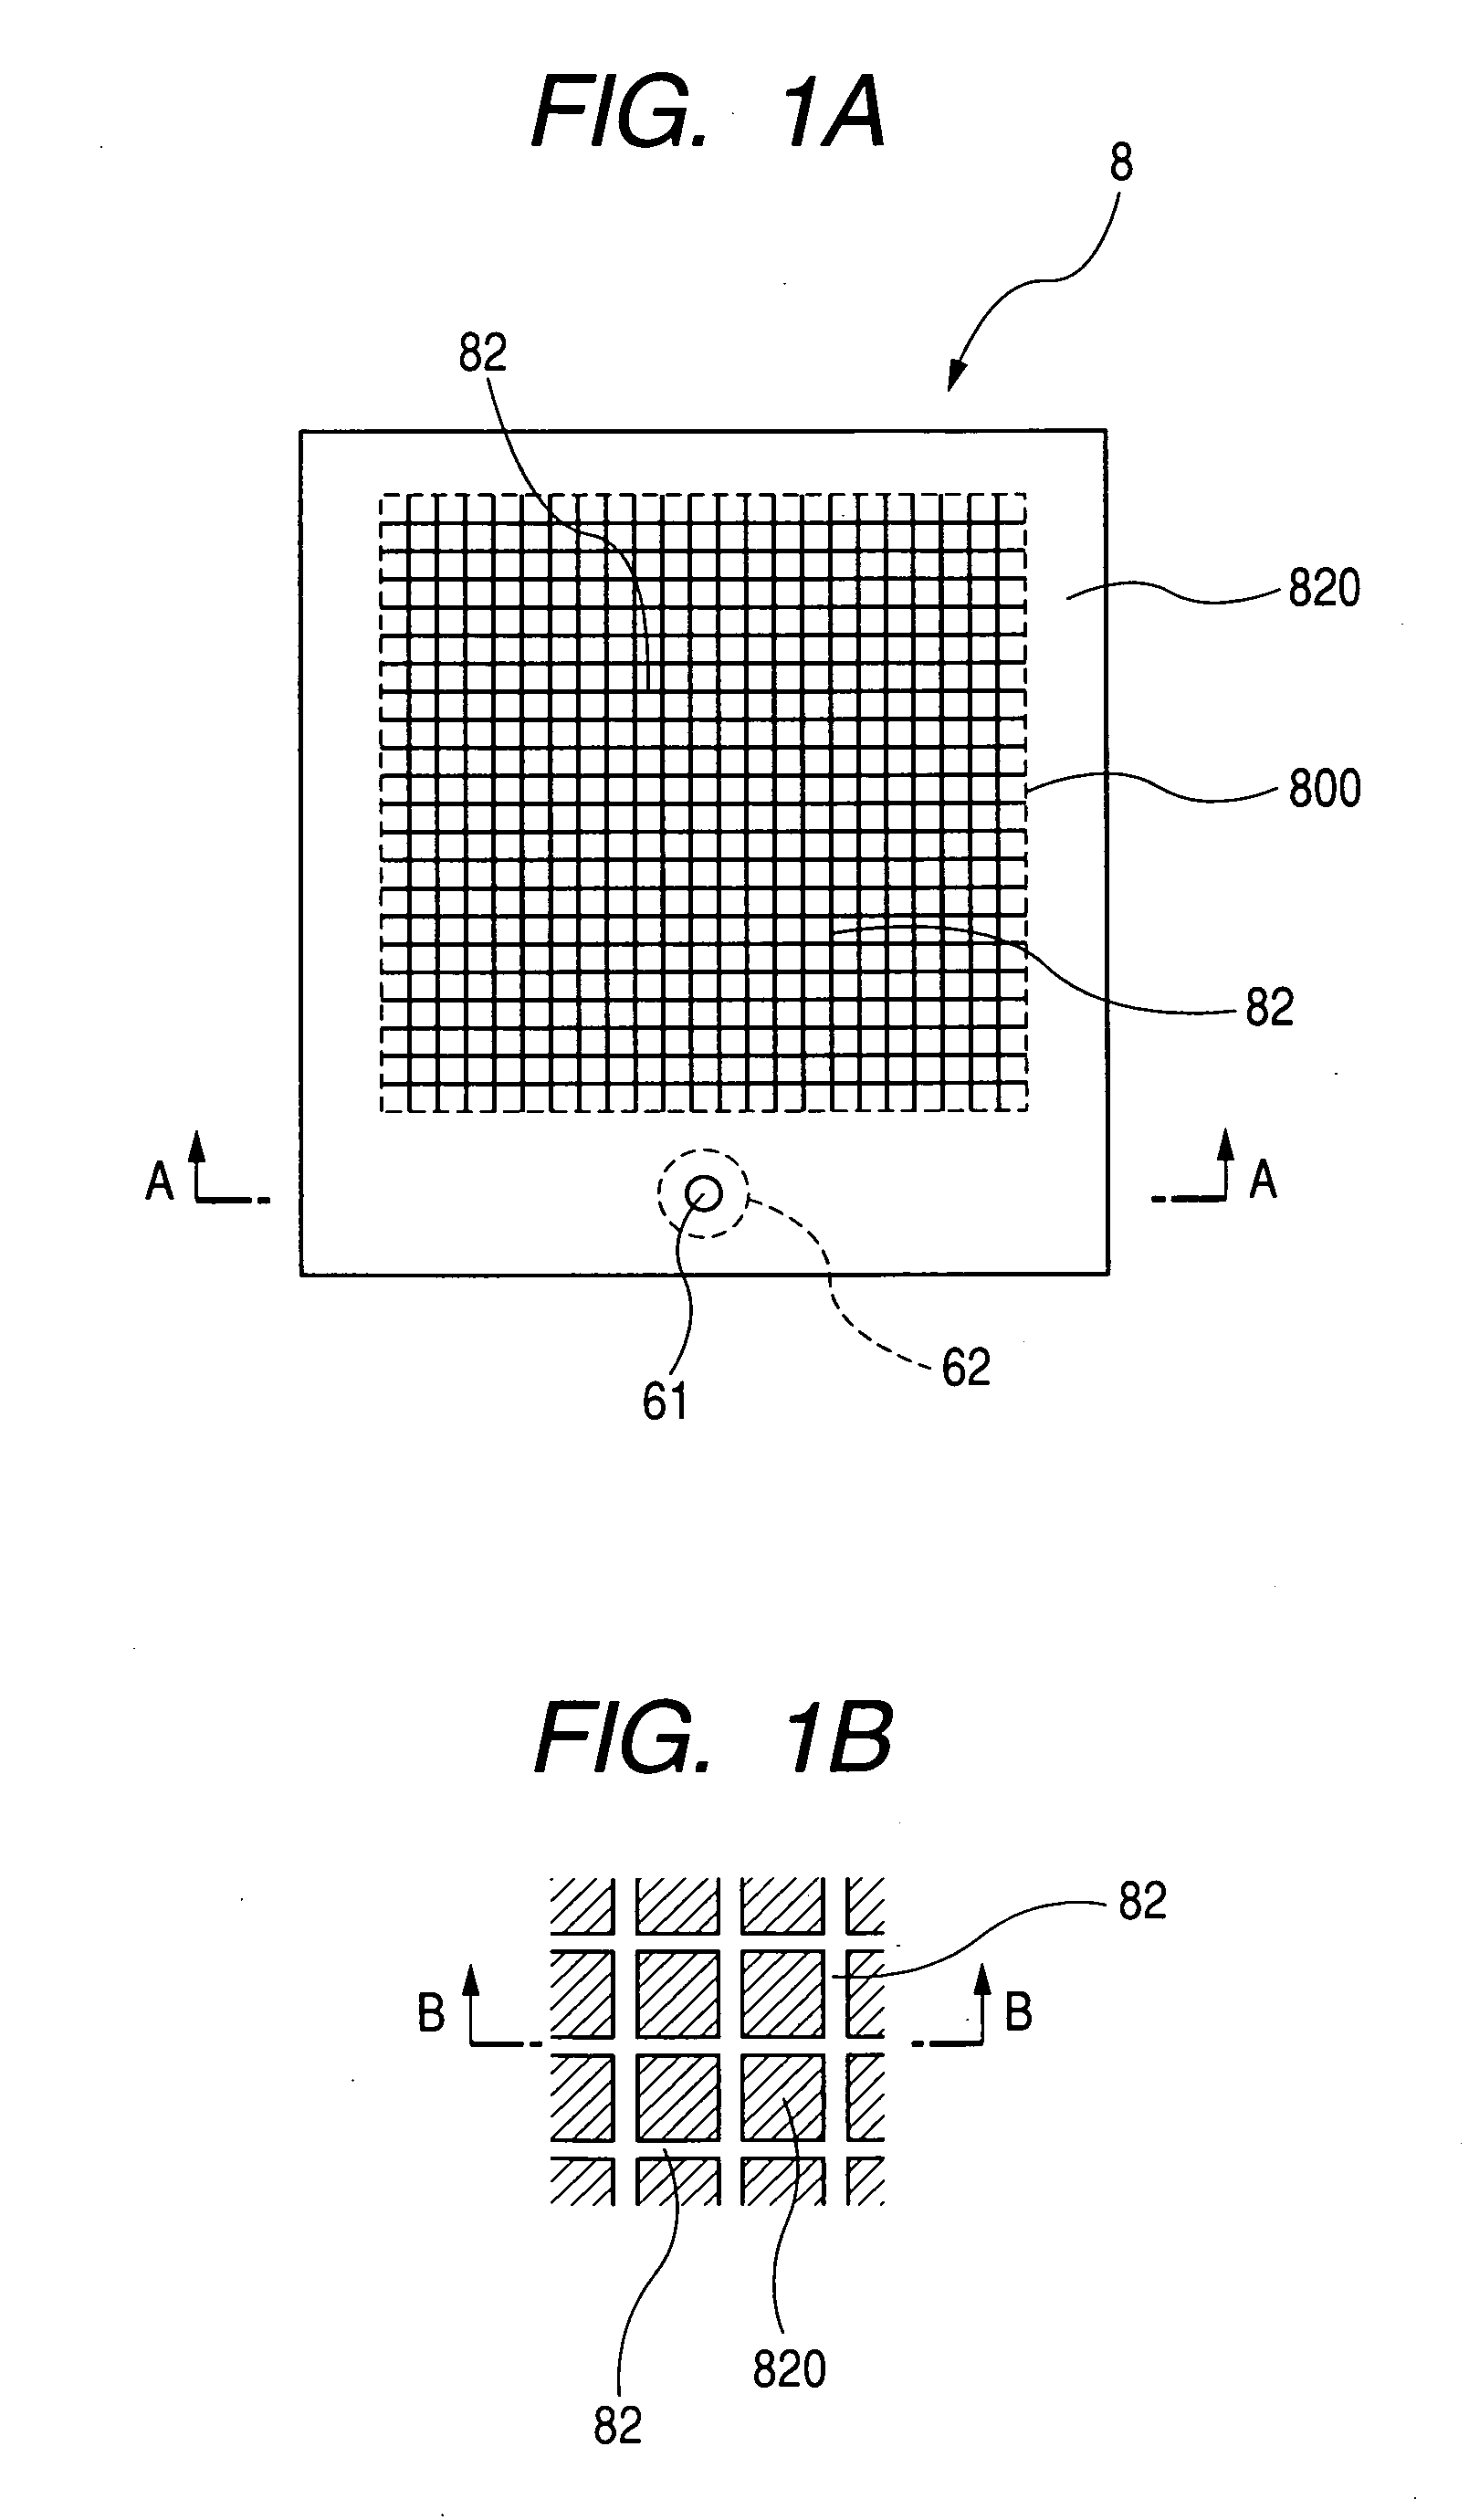 Method of producing molding die for use in producing a ceramic honeycomb structure body